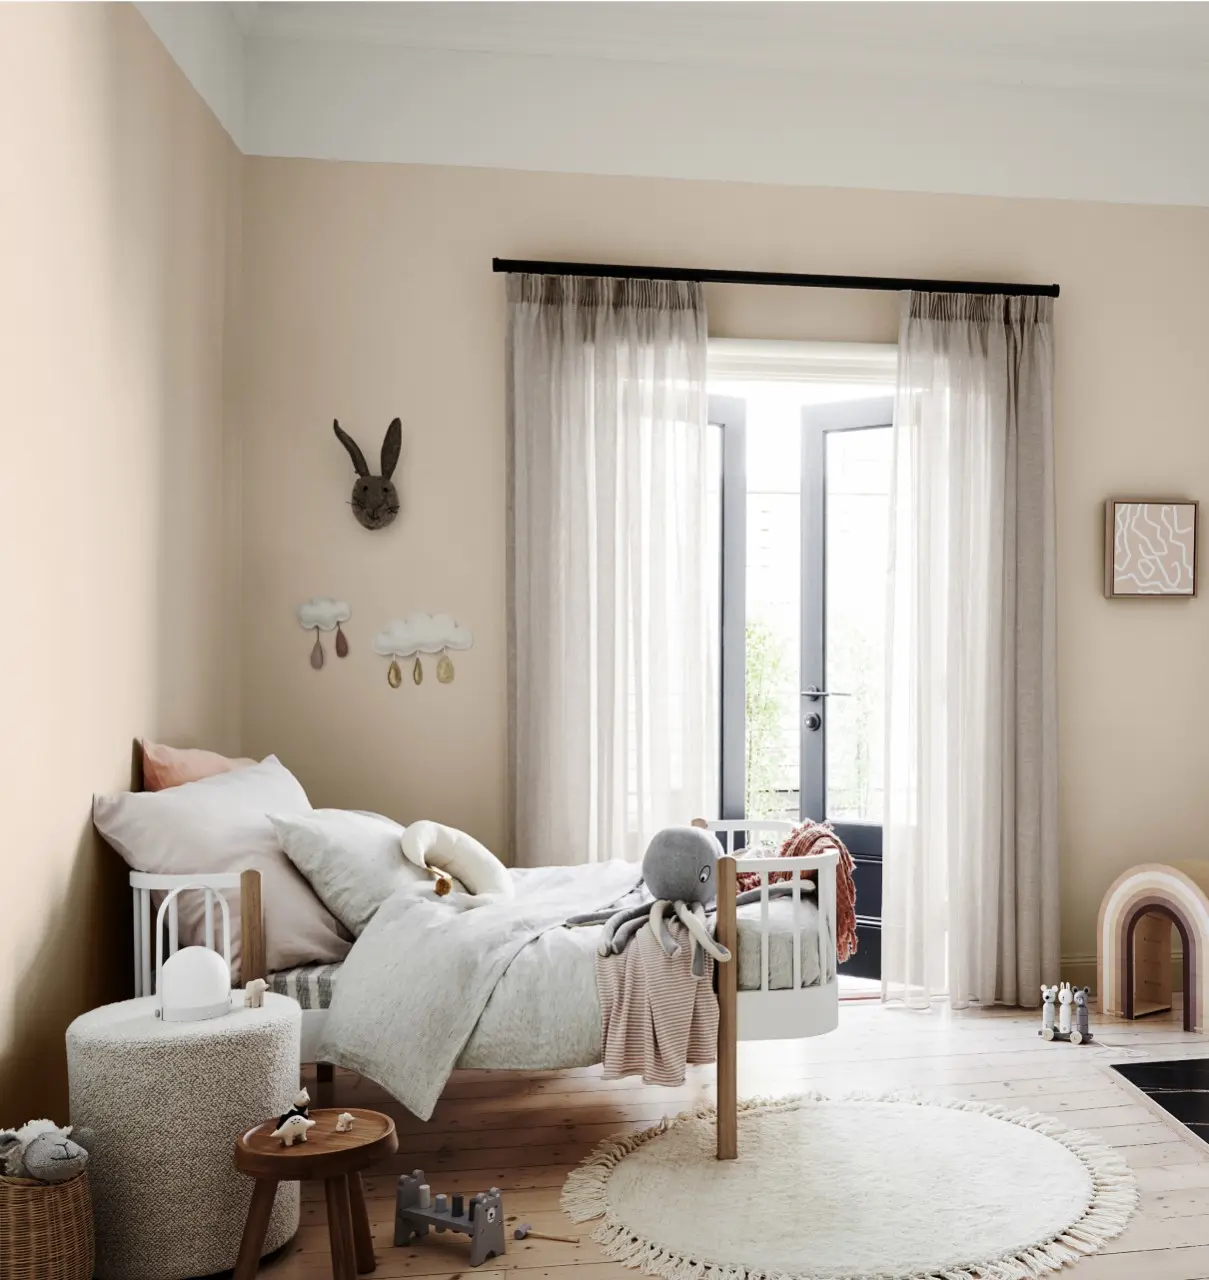 Cream and white kid's bedroom with various decorative items and furniture.